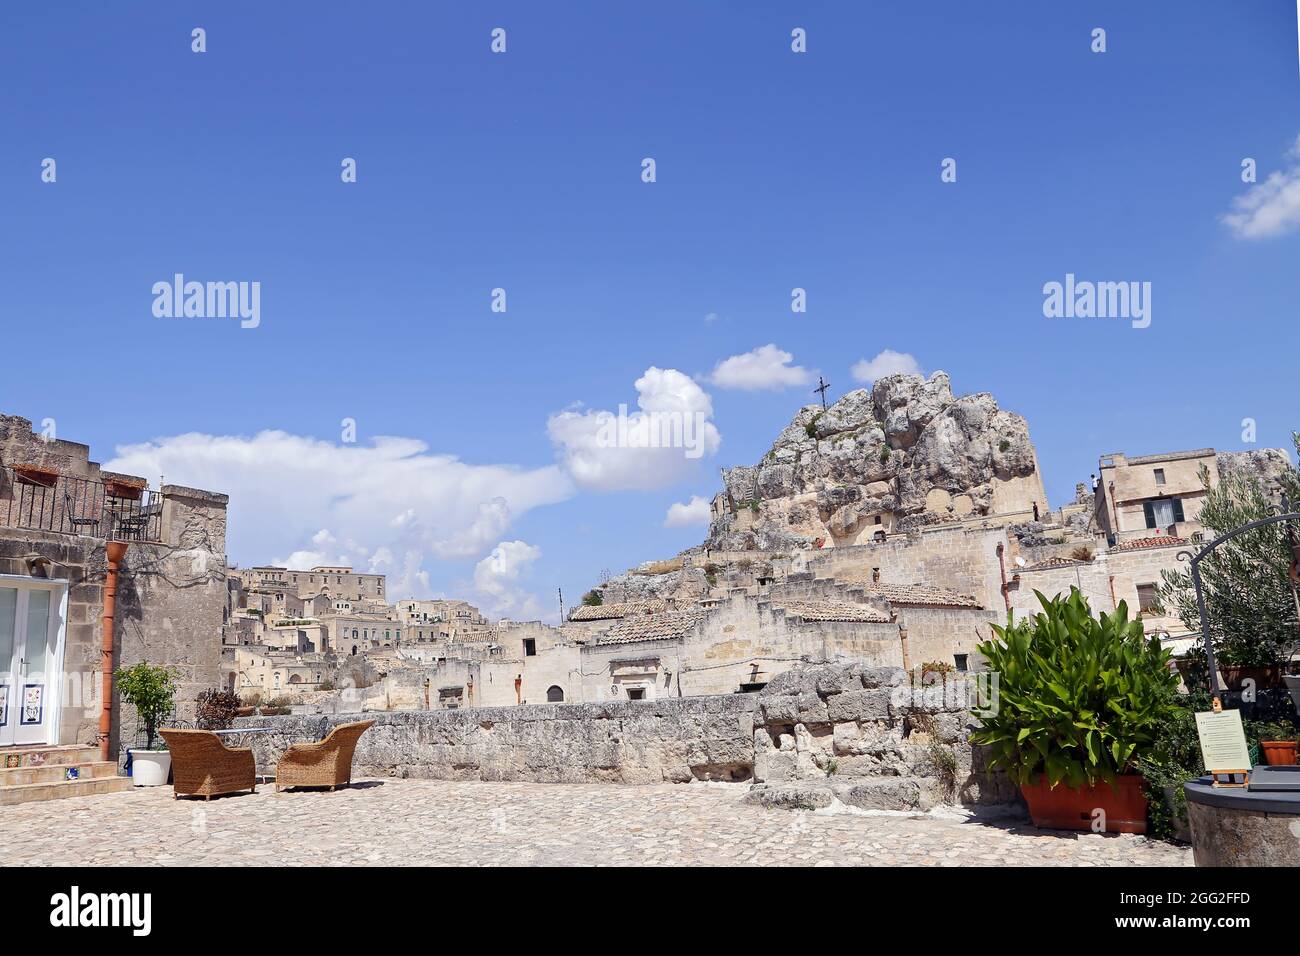 Matera, Italy - August 17, 2020: View of the Sassi di Matera a historic district in the city of Matera, well-known for their ancient cave dwellings. B Stock Photo